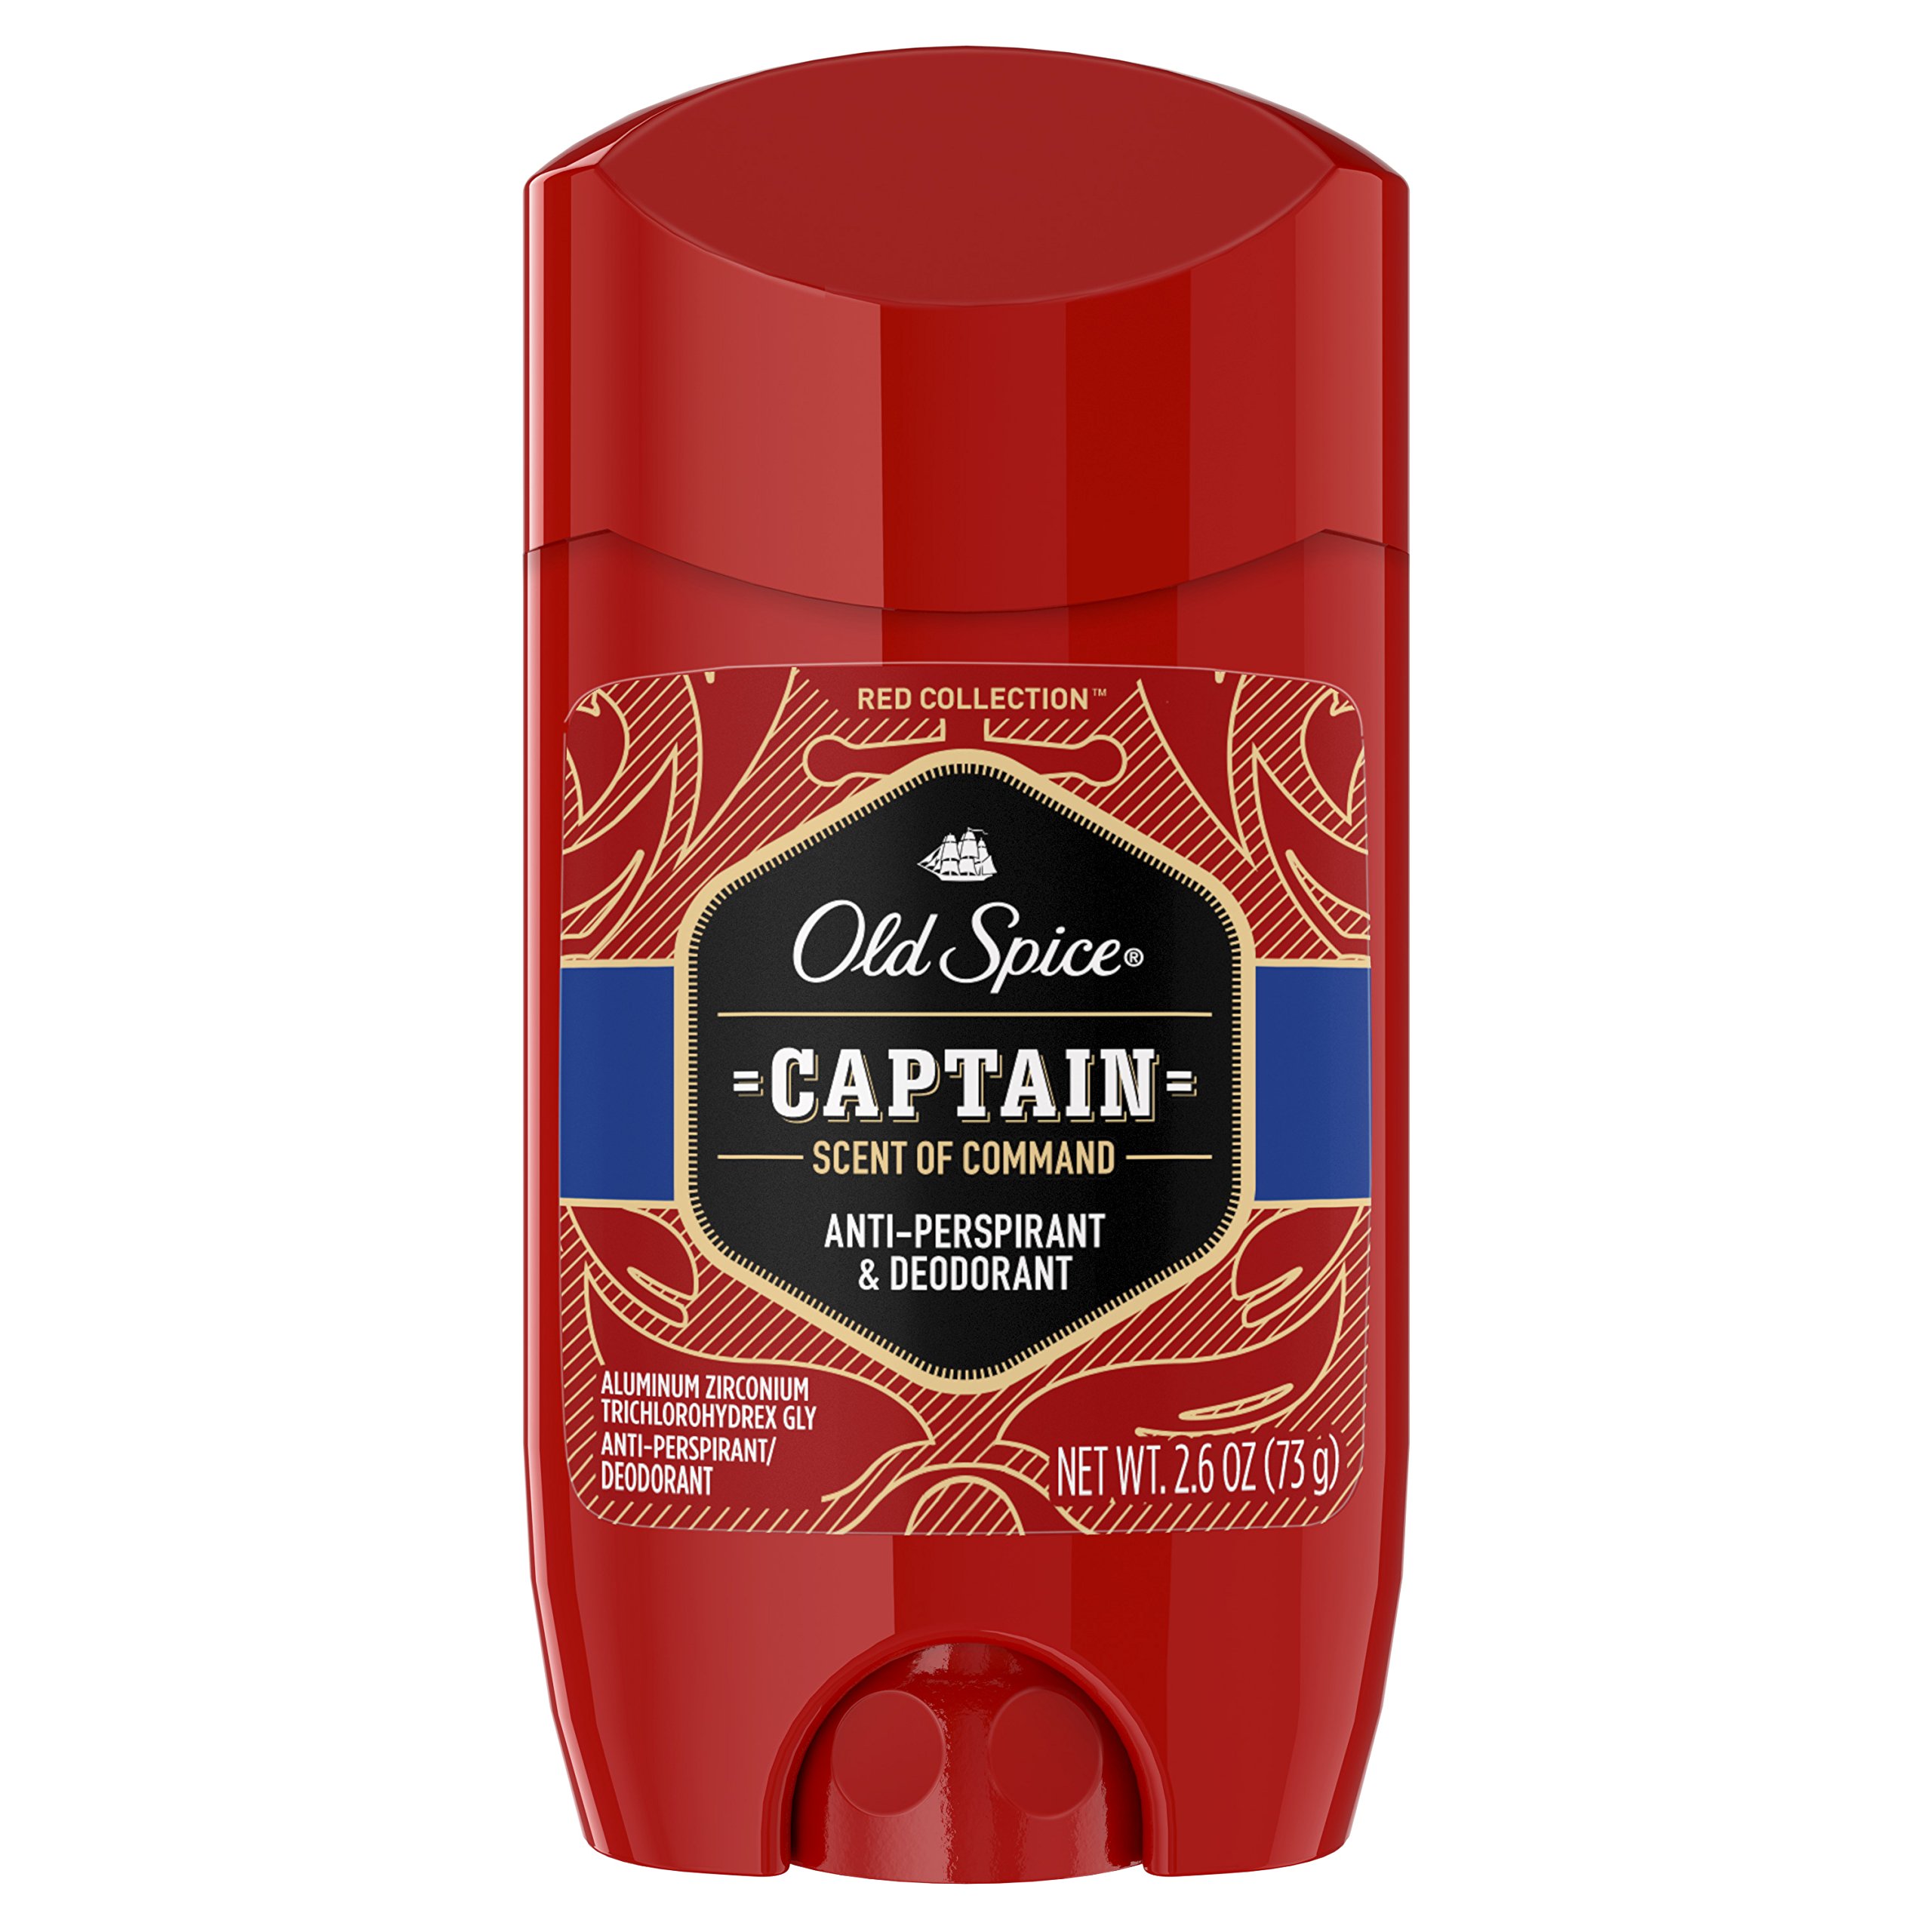 Old Spice Red Men's Antiperspirant/Deodorant Invisible Solid Collection, Captain, 2.6 oz 1